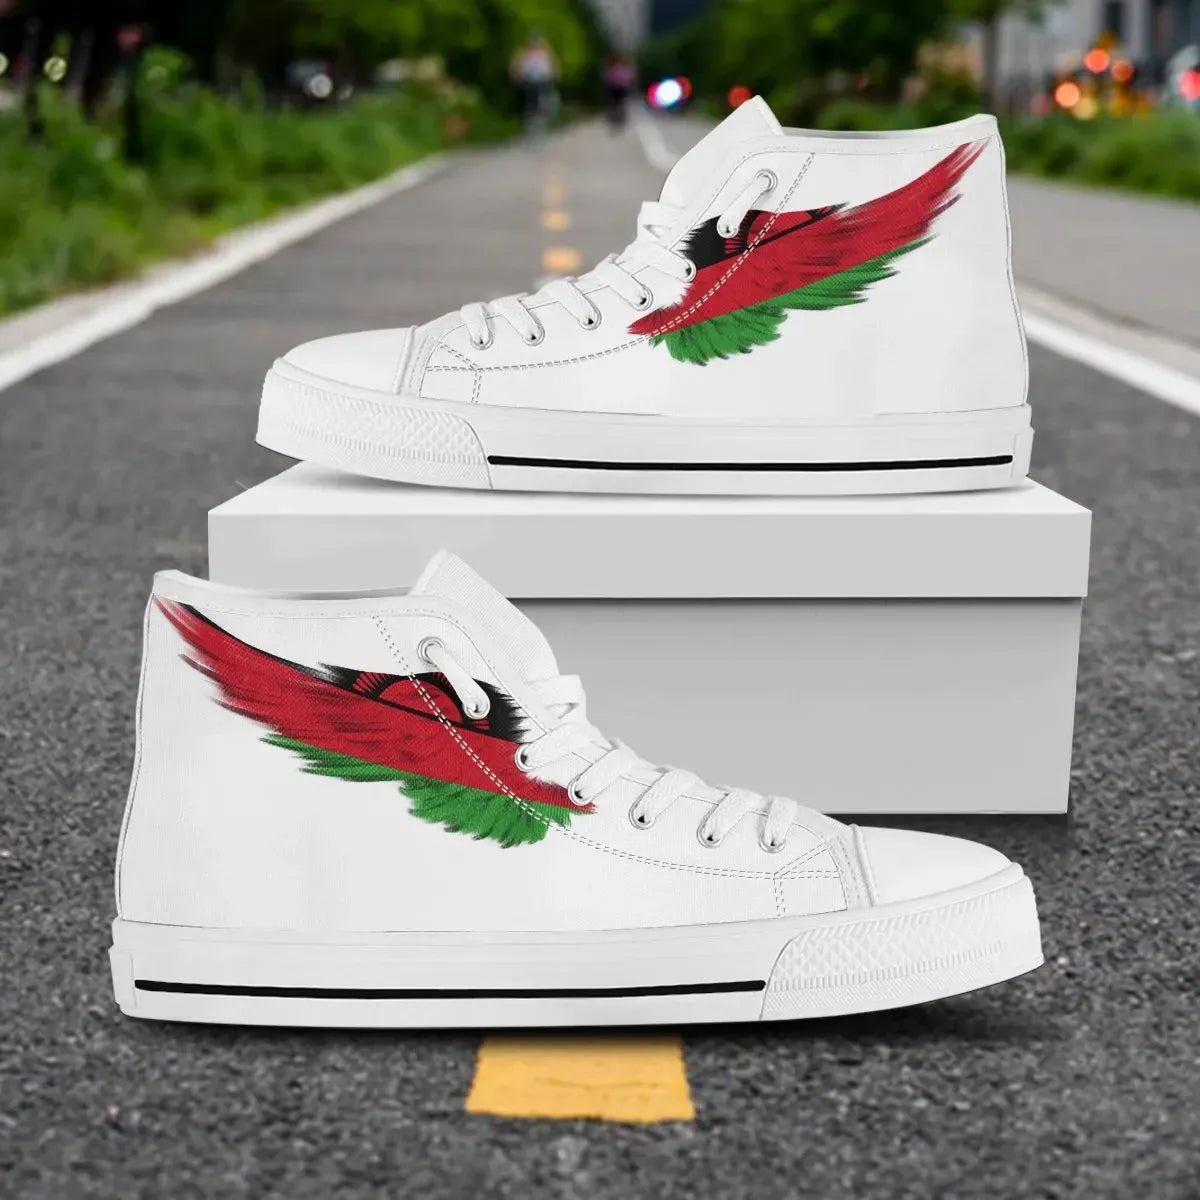 malawi-high-top-shoes-wing-flag